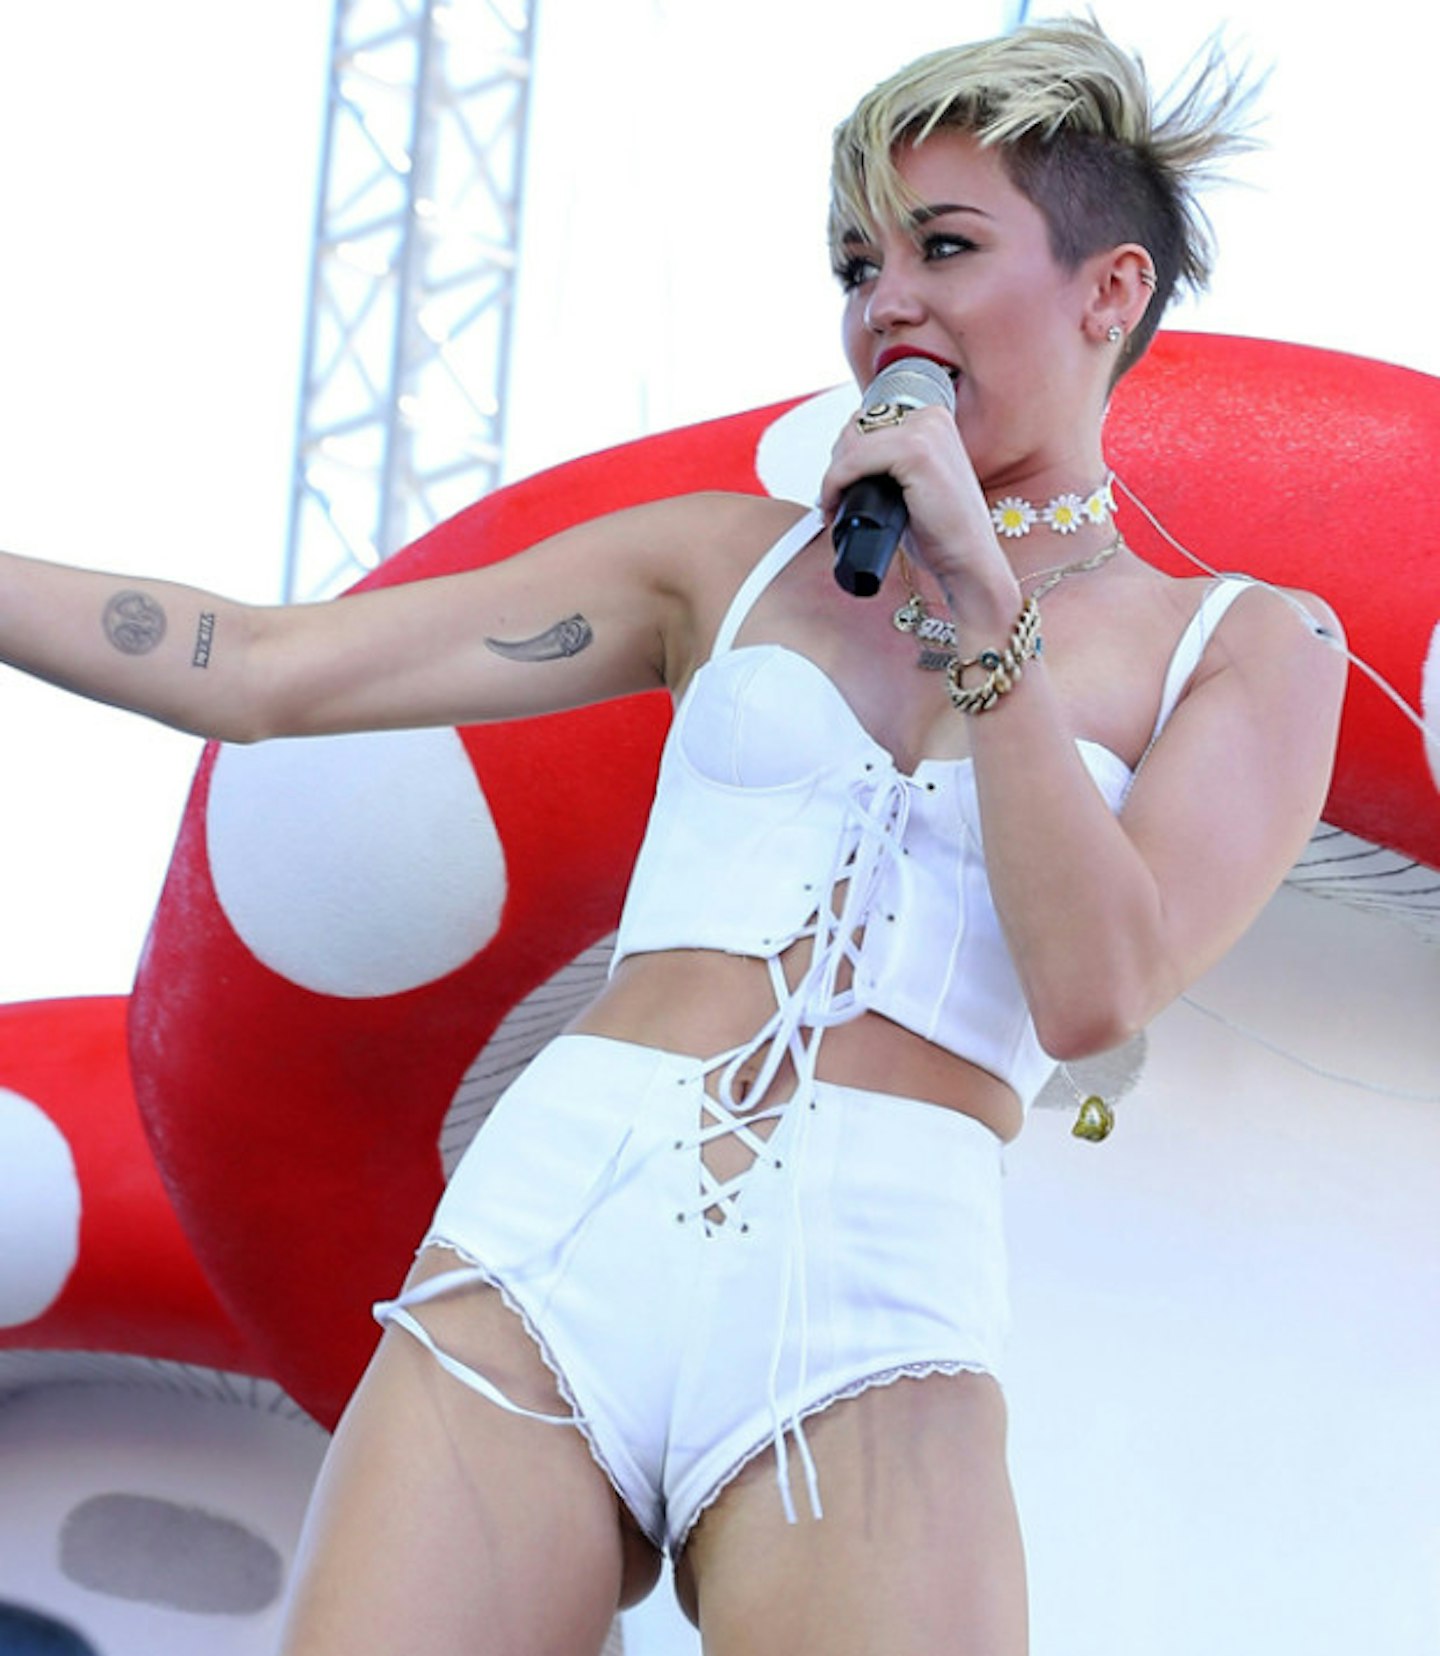 camel-toe-gallery-miley-cyrus-white-lace-top-pants